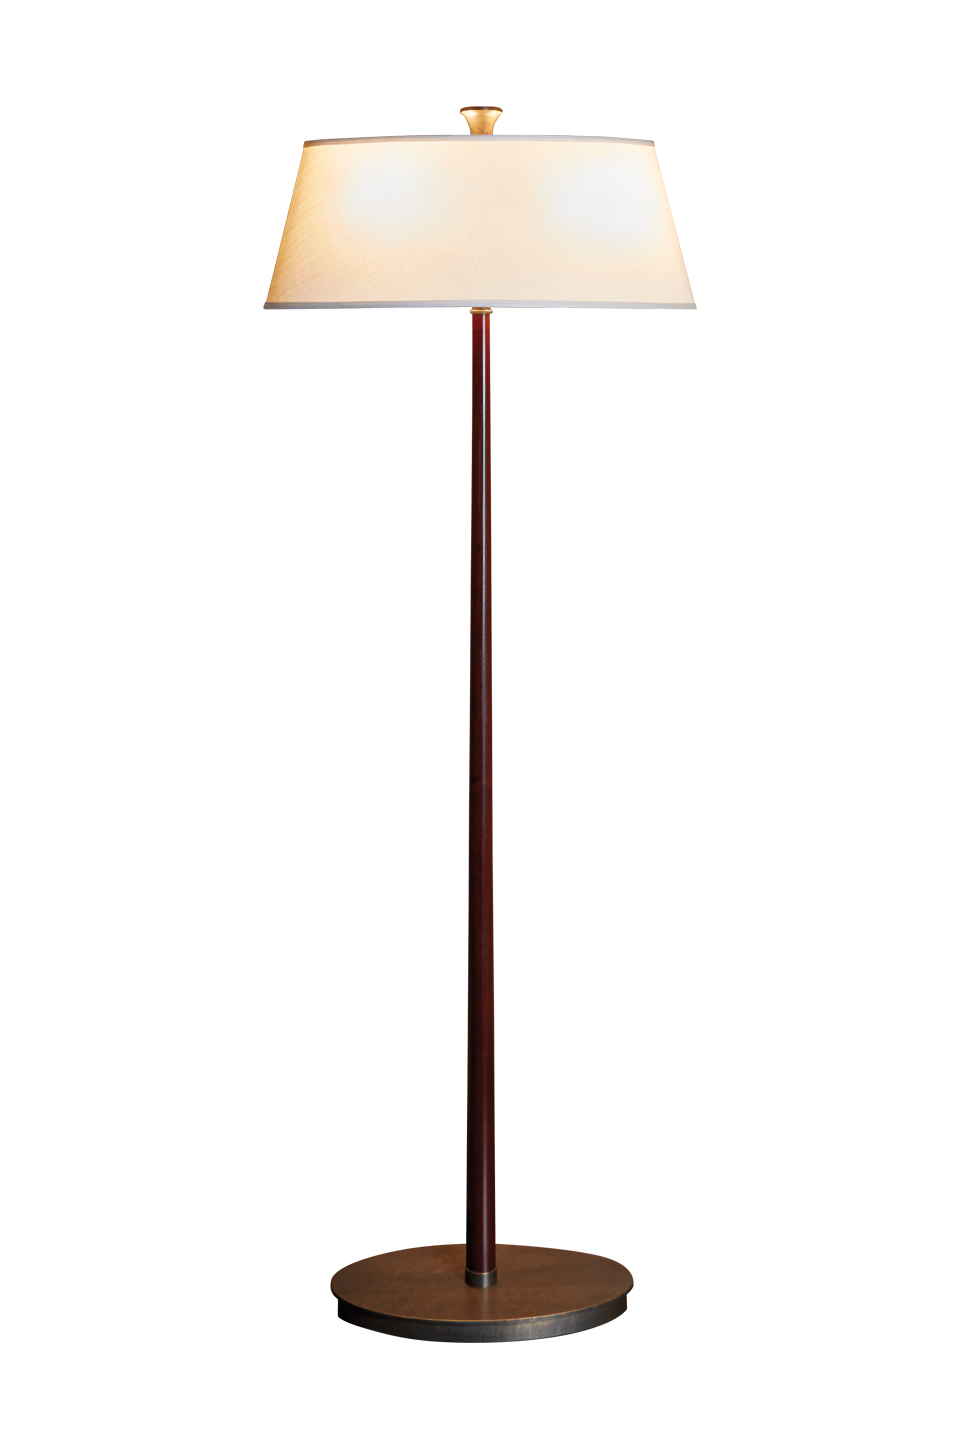 Rita is a floor LED lamp with a wooden strucutre, a bronze base and a linen, cotton or hand-embroidered silk lampashade, from Promemoria's catalogue | Promemoria